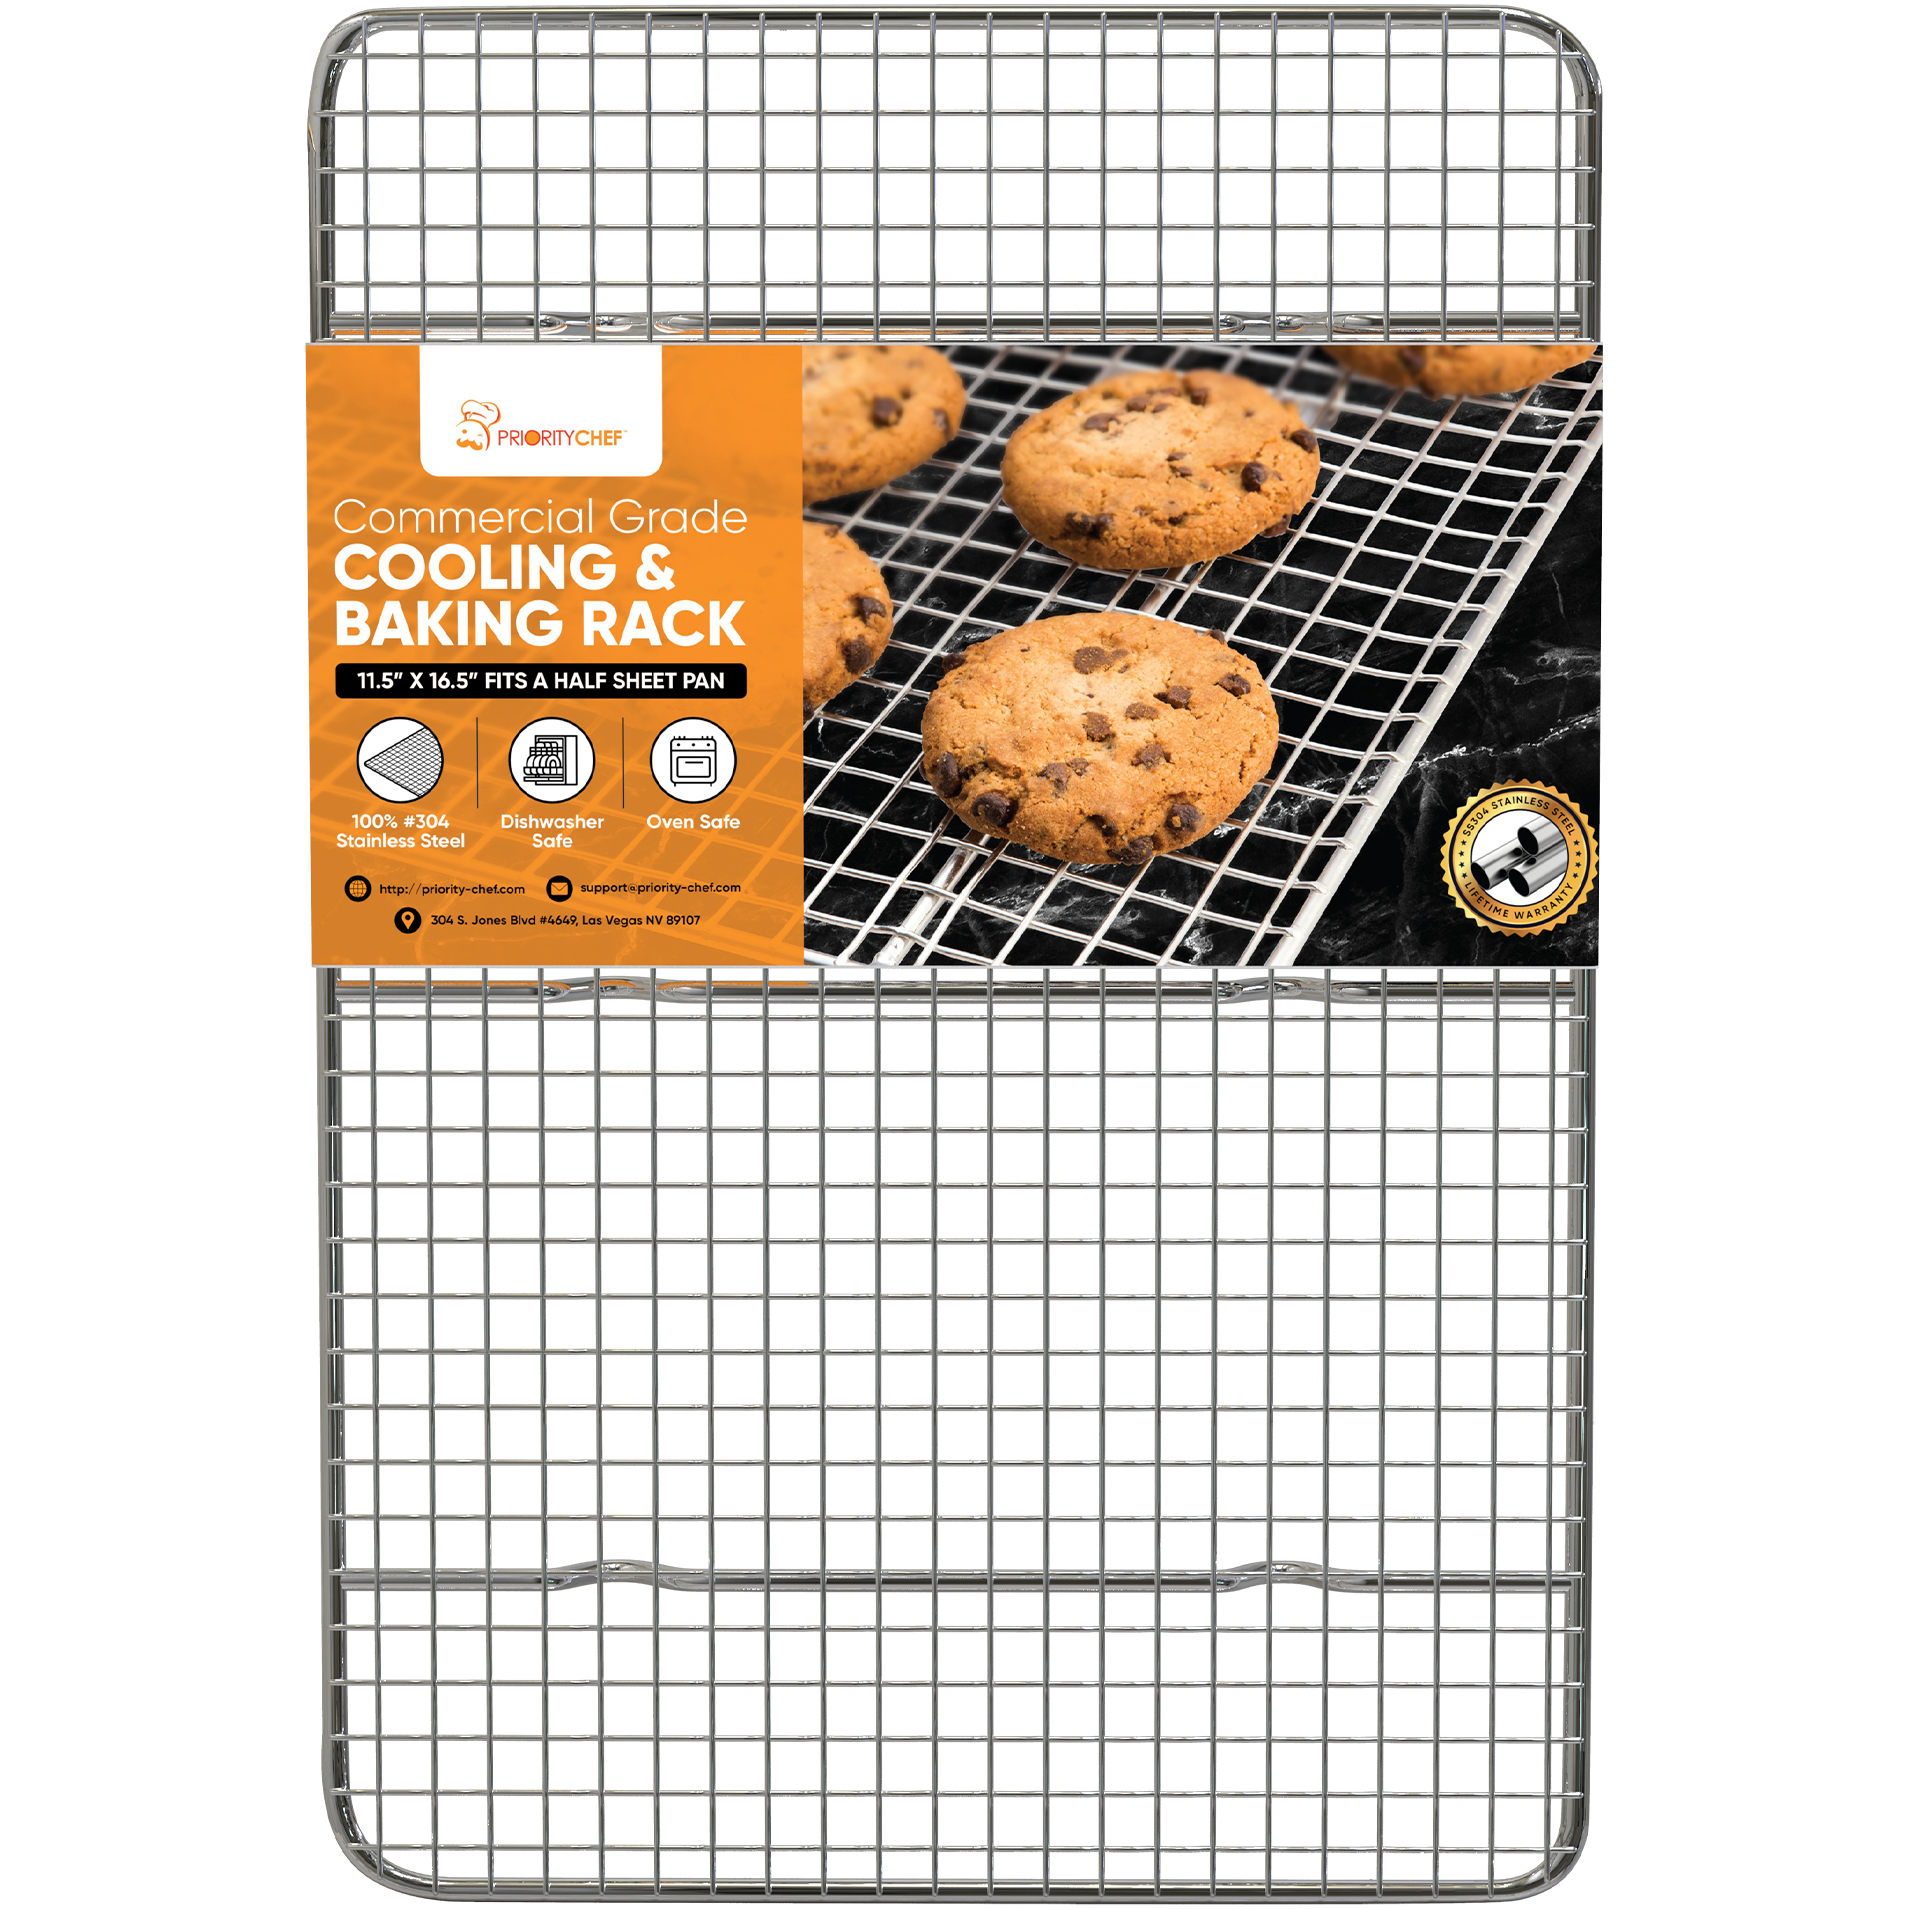 https://freeprioritychef.com/hosted/images/19/0ba4260bfd49a6824ddd91c62e782c/Cooling-Rack---11in.png